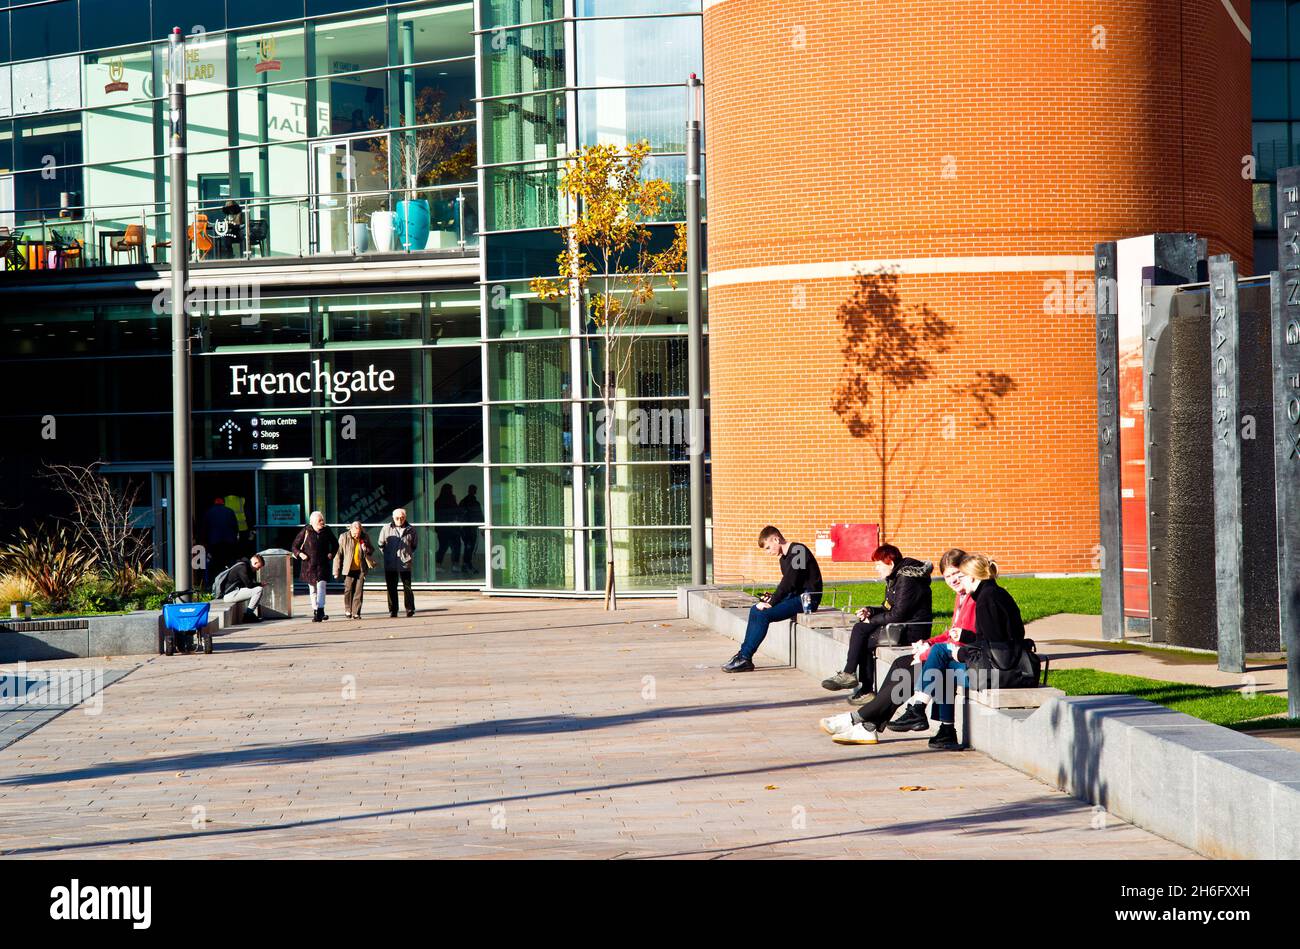 Frenchgate Shopping Centre, Doncaster, England Stock Photo